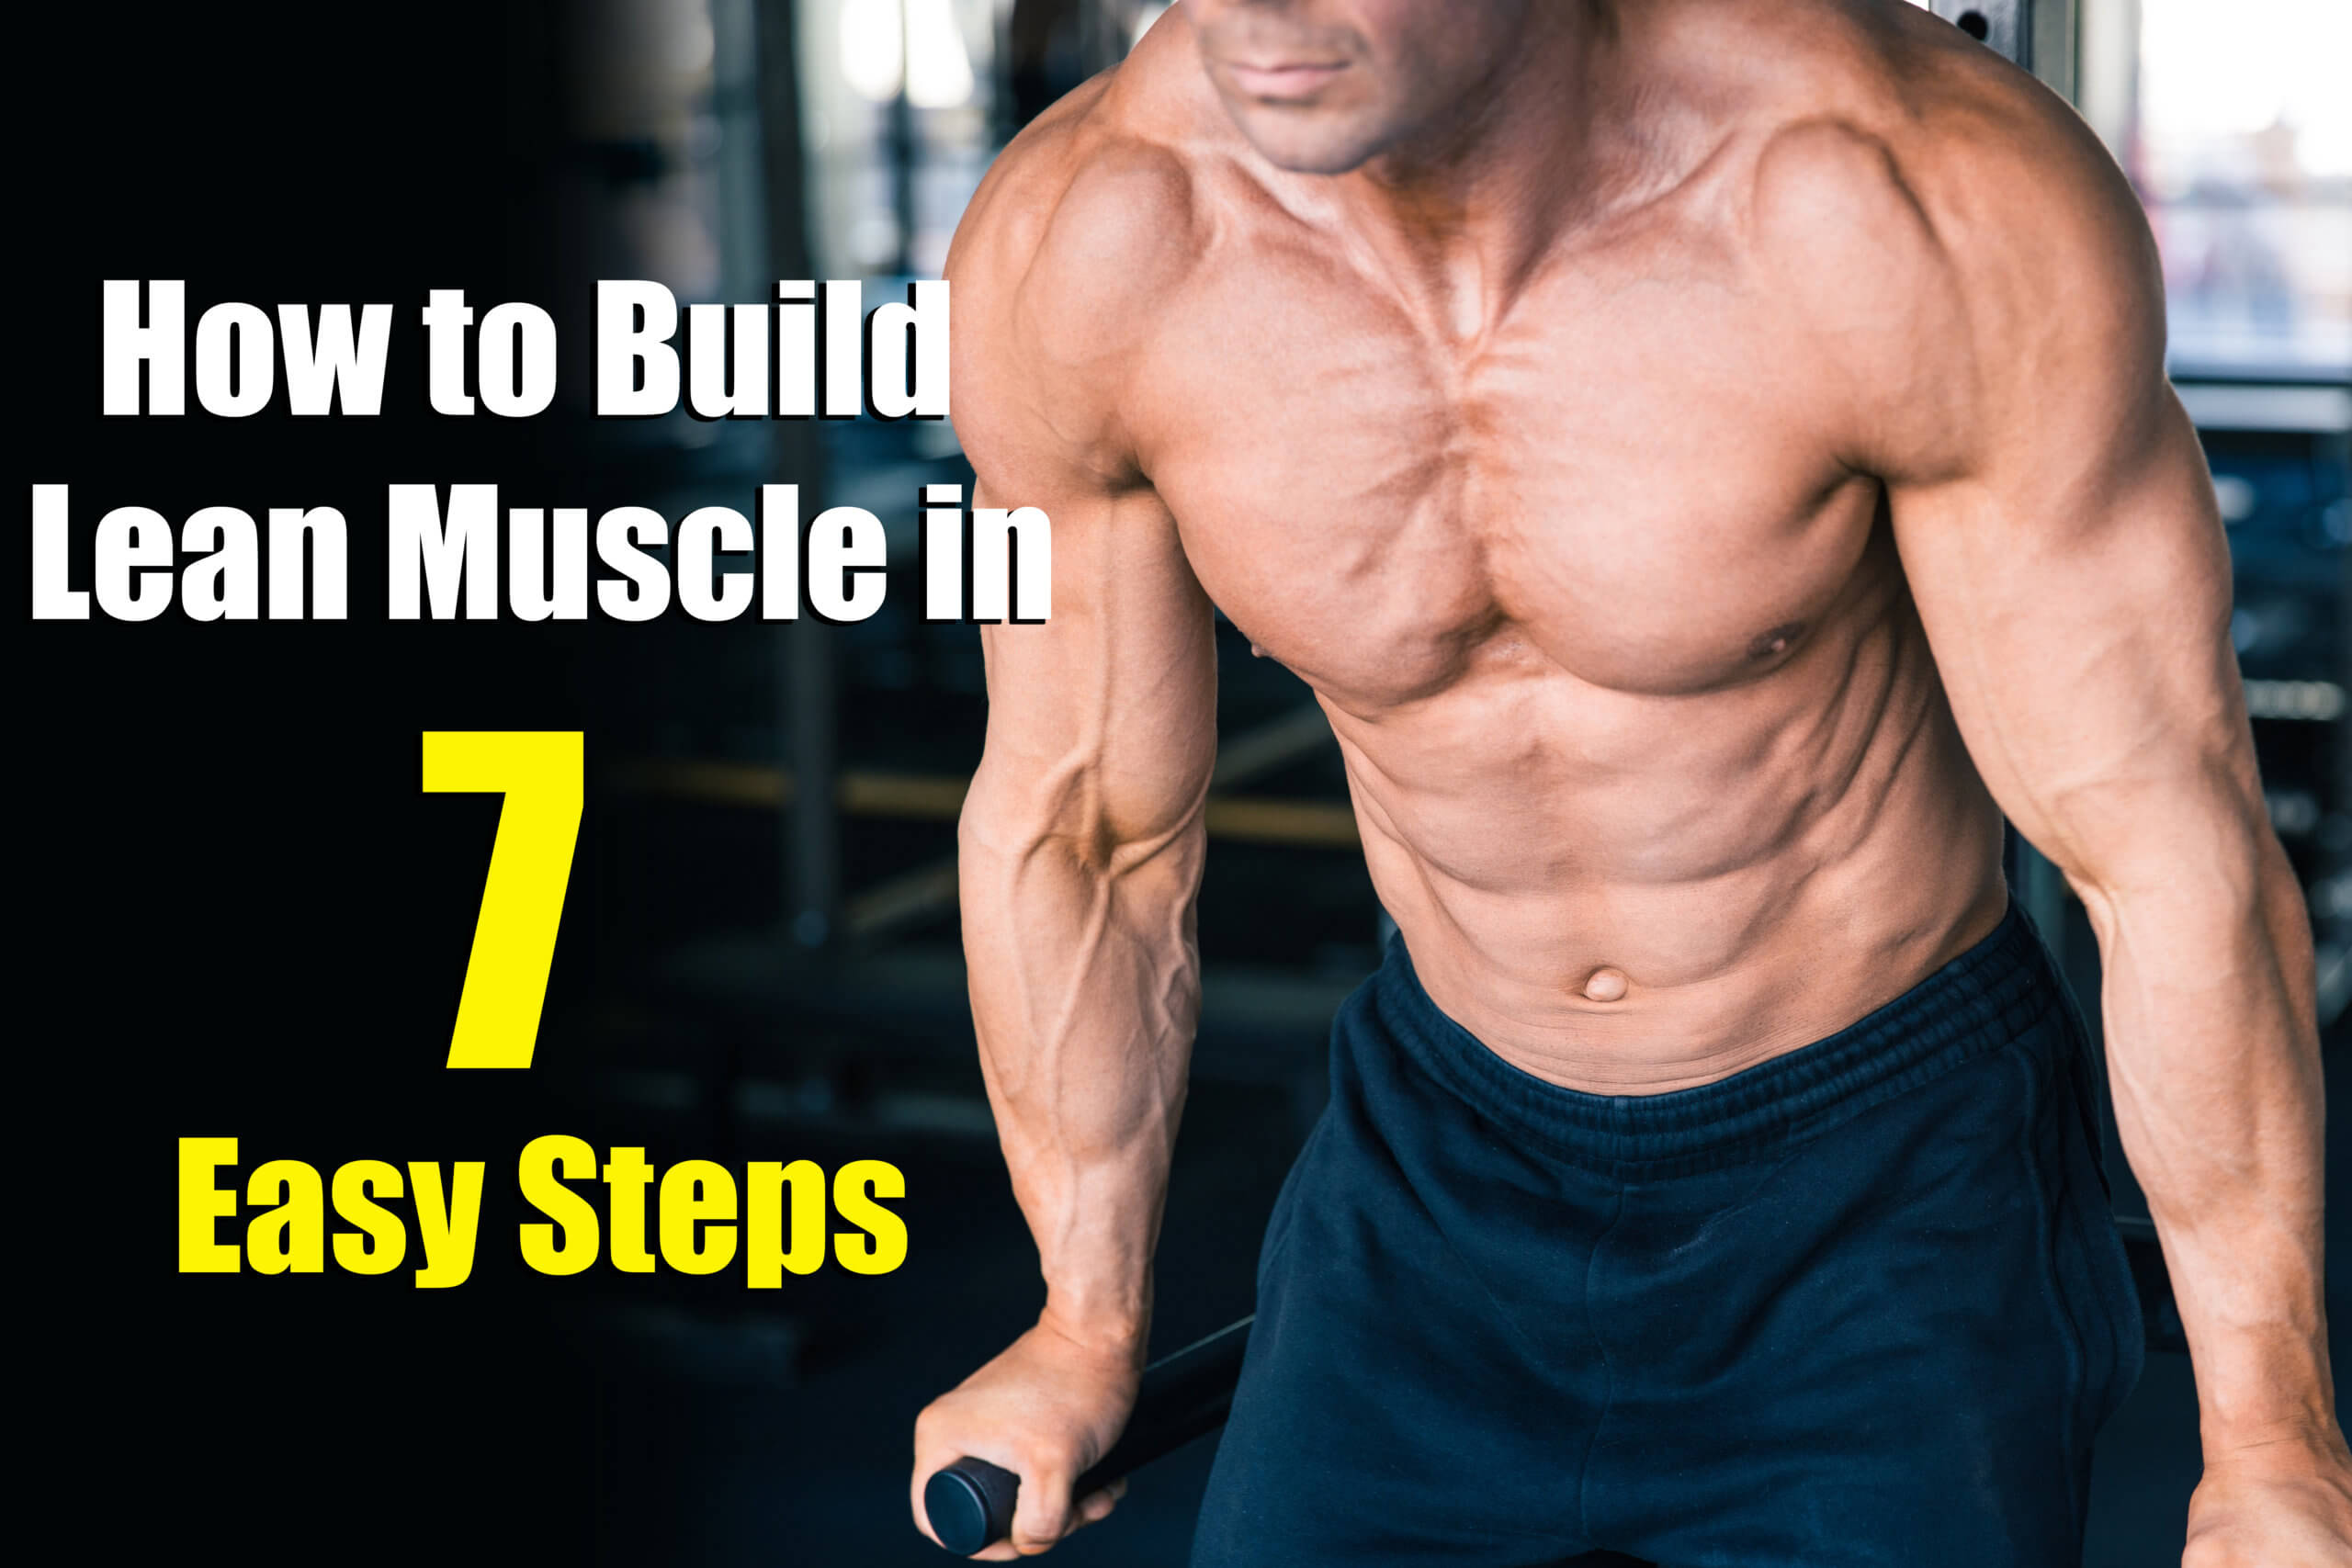 Tips for men who want to build muscle effectively and gain lean